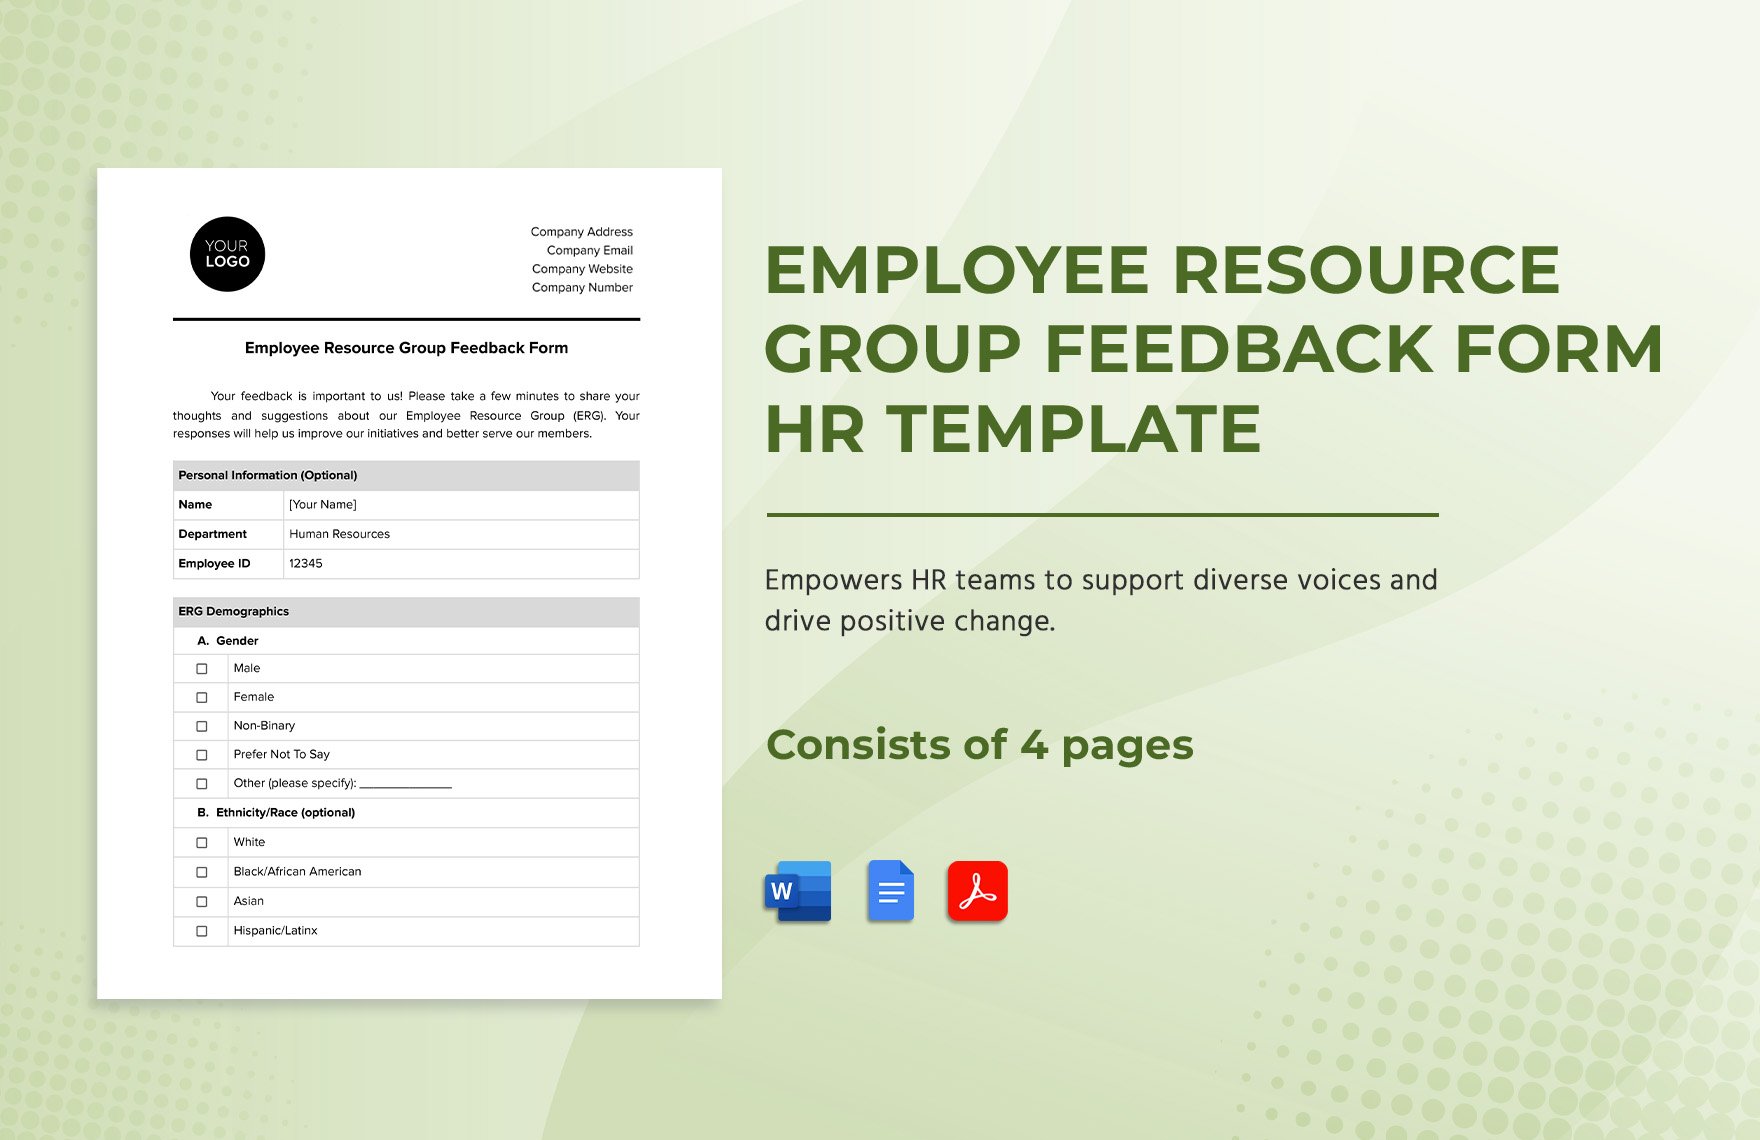 Employee Resource Group Feedback Form HR Template in Word, Google Docs, PDF